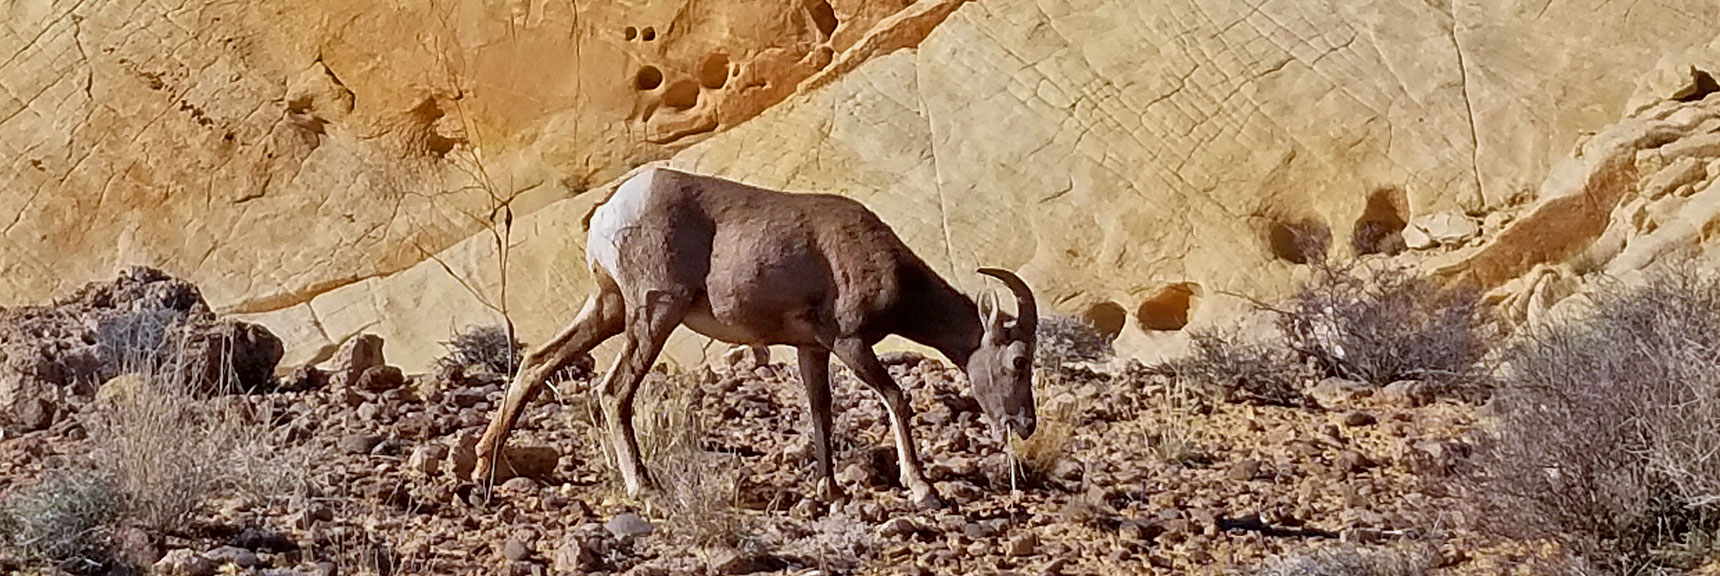 Bighorn Sheep at Silica Dome in Valley of Fire State Park, Nevada